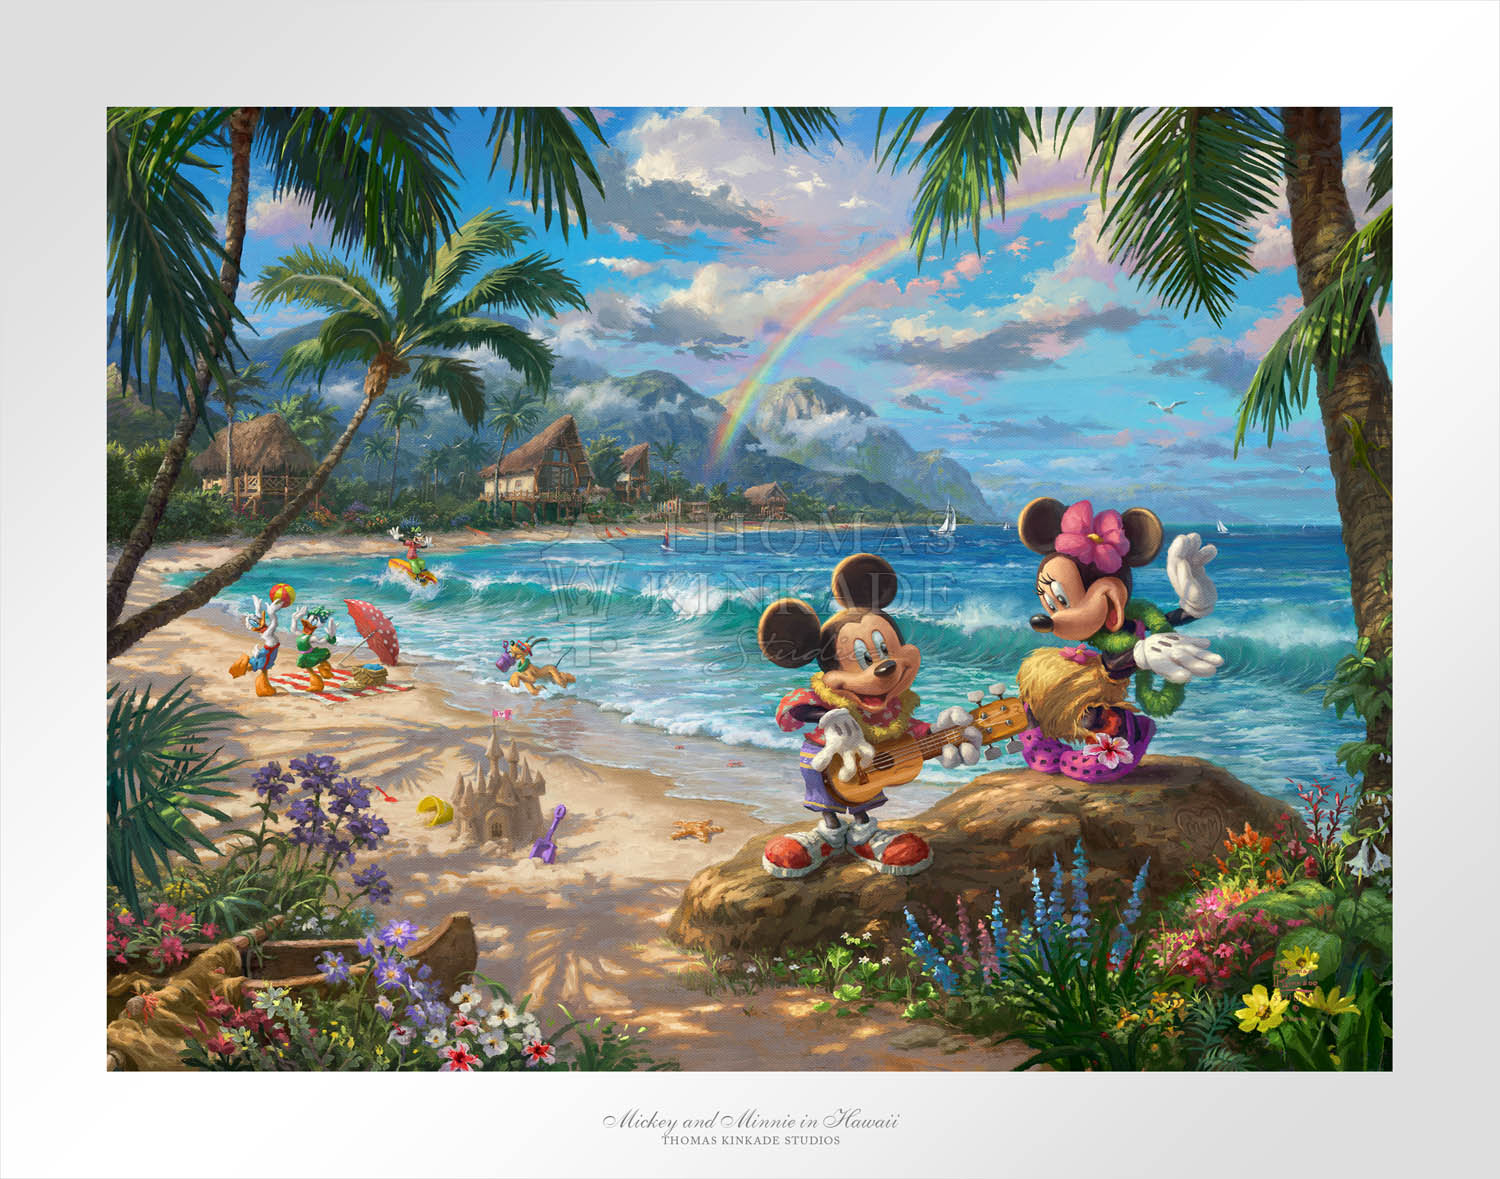  Mickey plays his ukulele for Minnie, while Donald, Daisy play ball, and Pluto run around carrying a bucket, and Goofy is out surfing. Unframed Paper